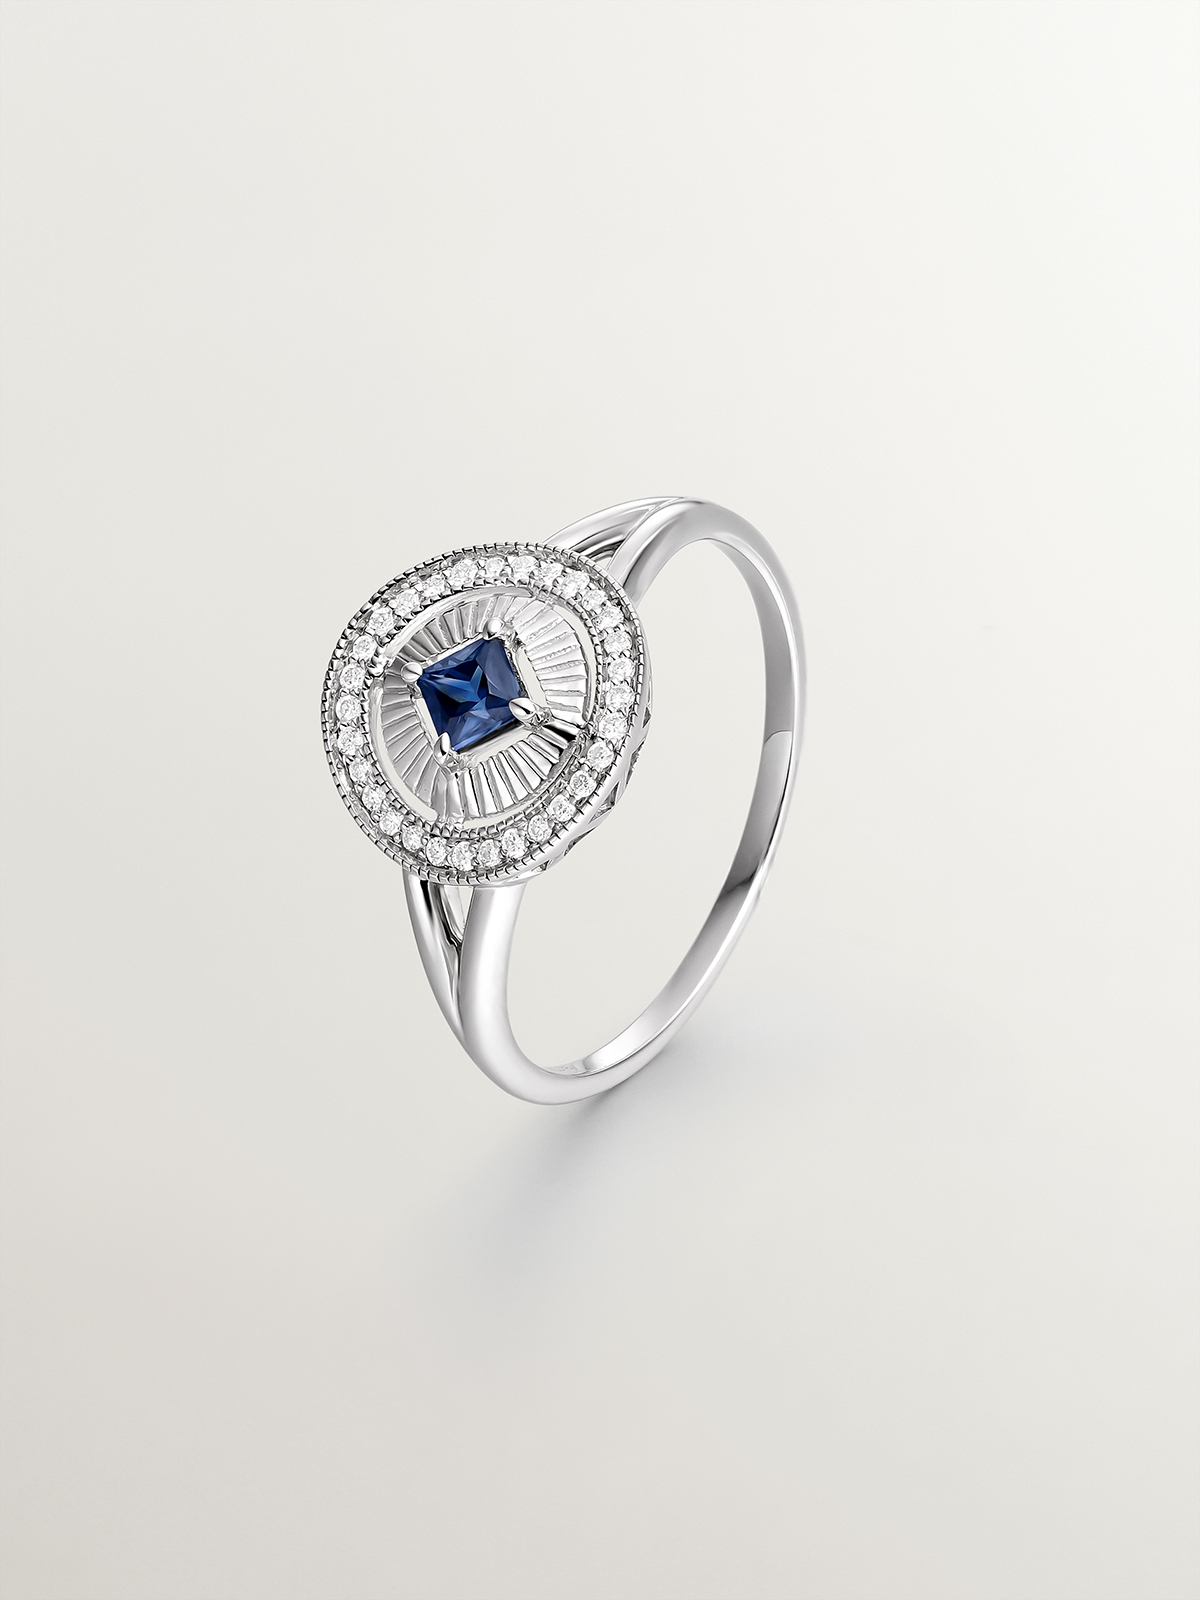 18K white gold ring with brilliant-cut diamonds and princess-cut blue sapphire